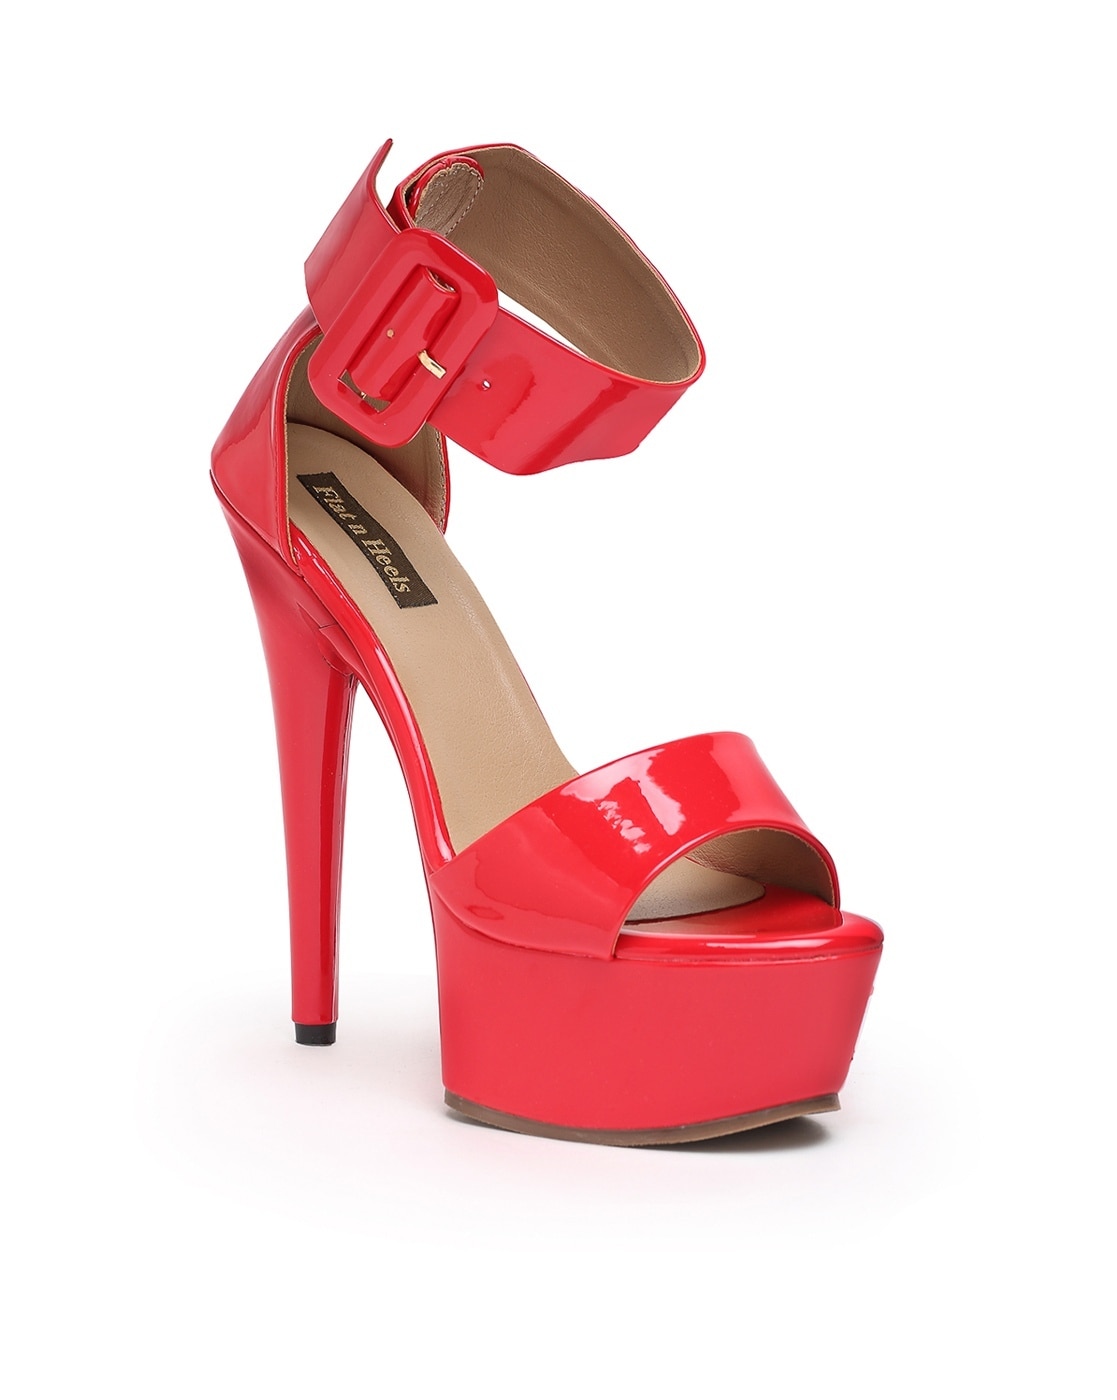 Heels & Wedges - Red - women - 355 products | FASHIOLA INDIA